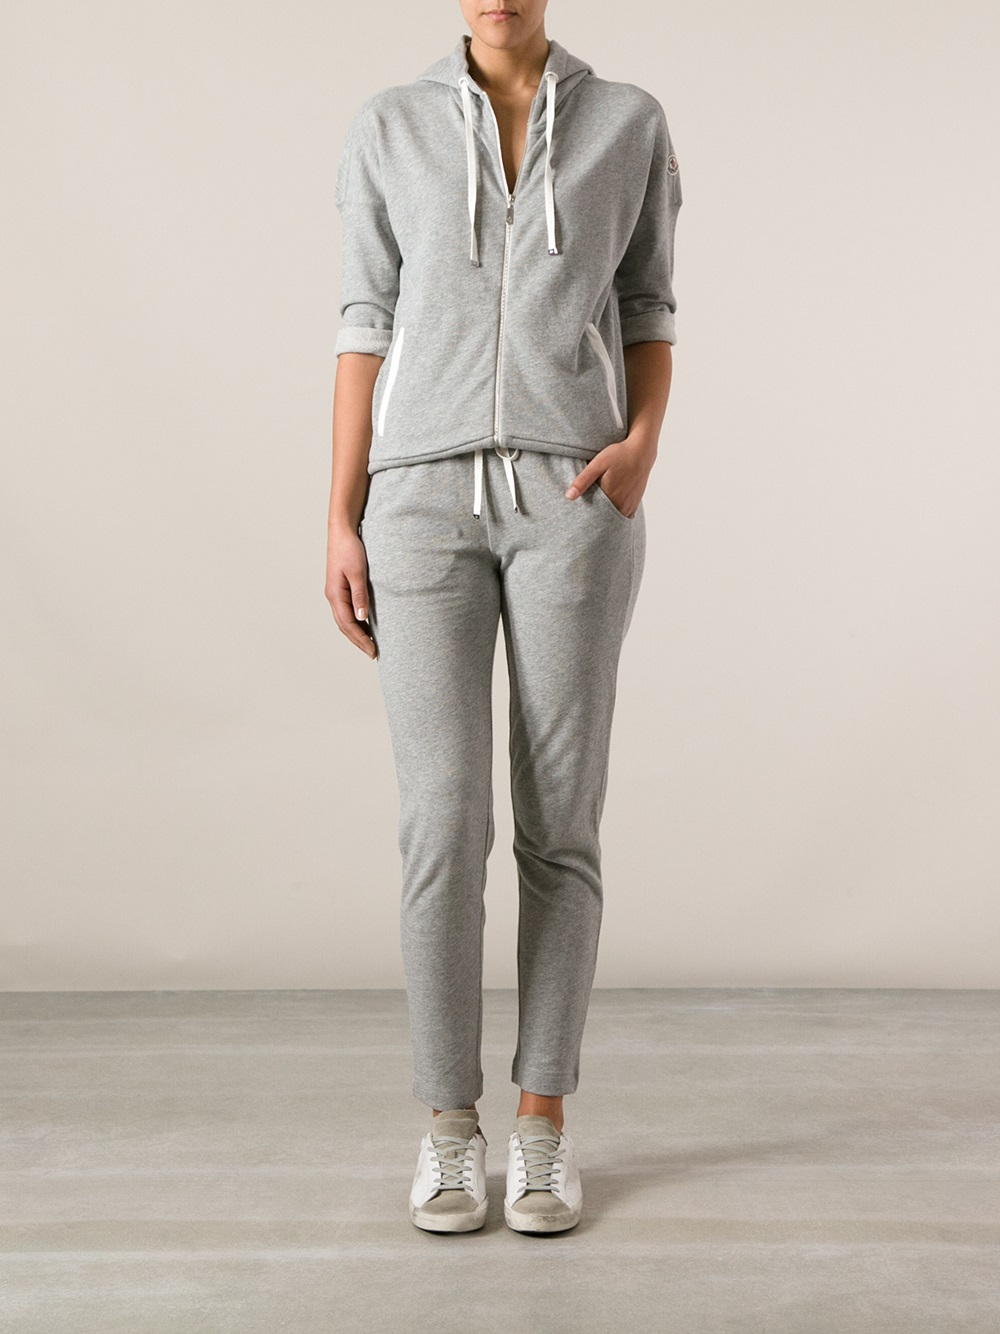 Lyst - Moncler Drawstring Track Pant in Gray